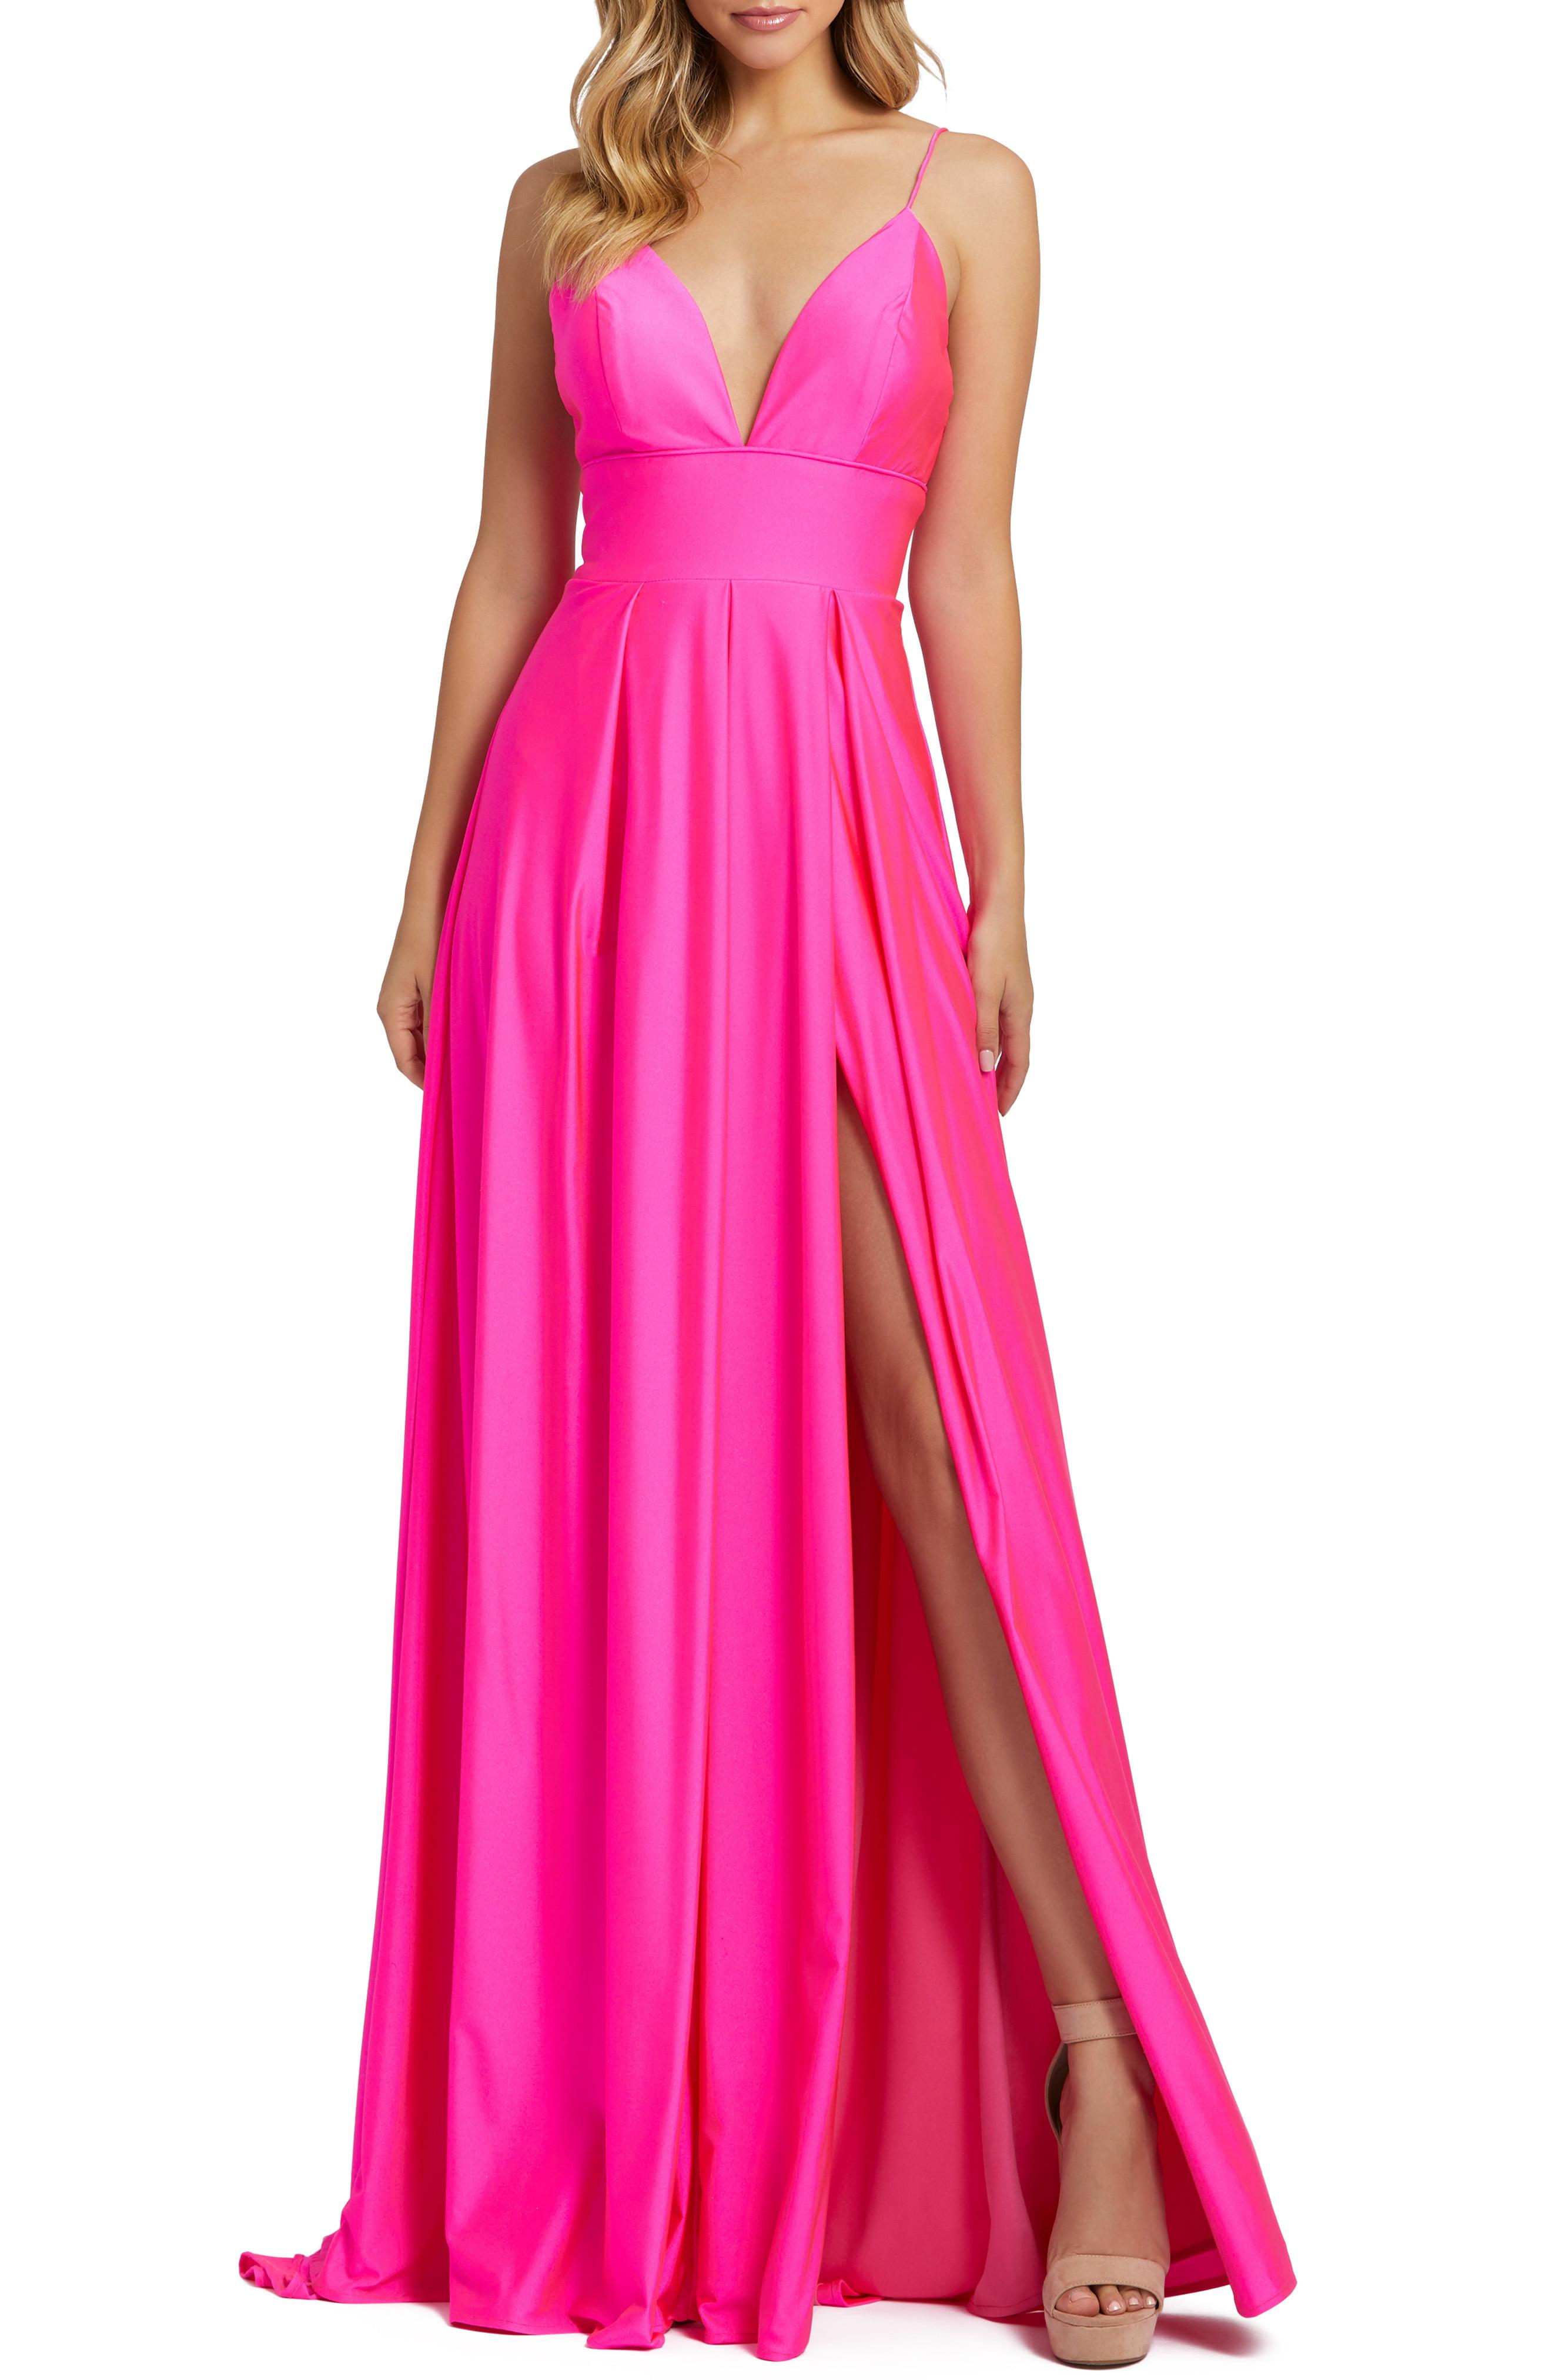 Mac Duggal Plunge Neck Pleated Gown in Electric Pink (Pink) - Lyst